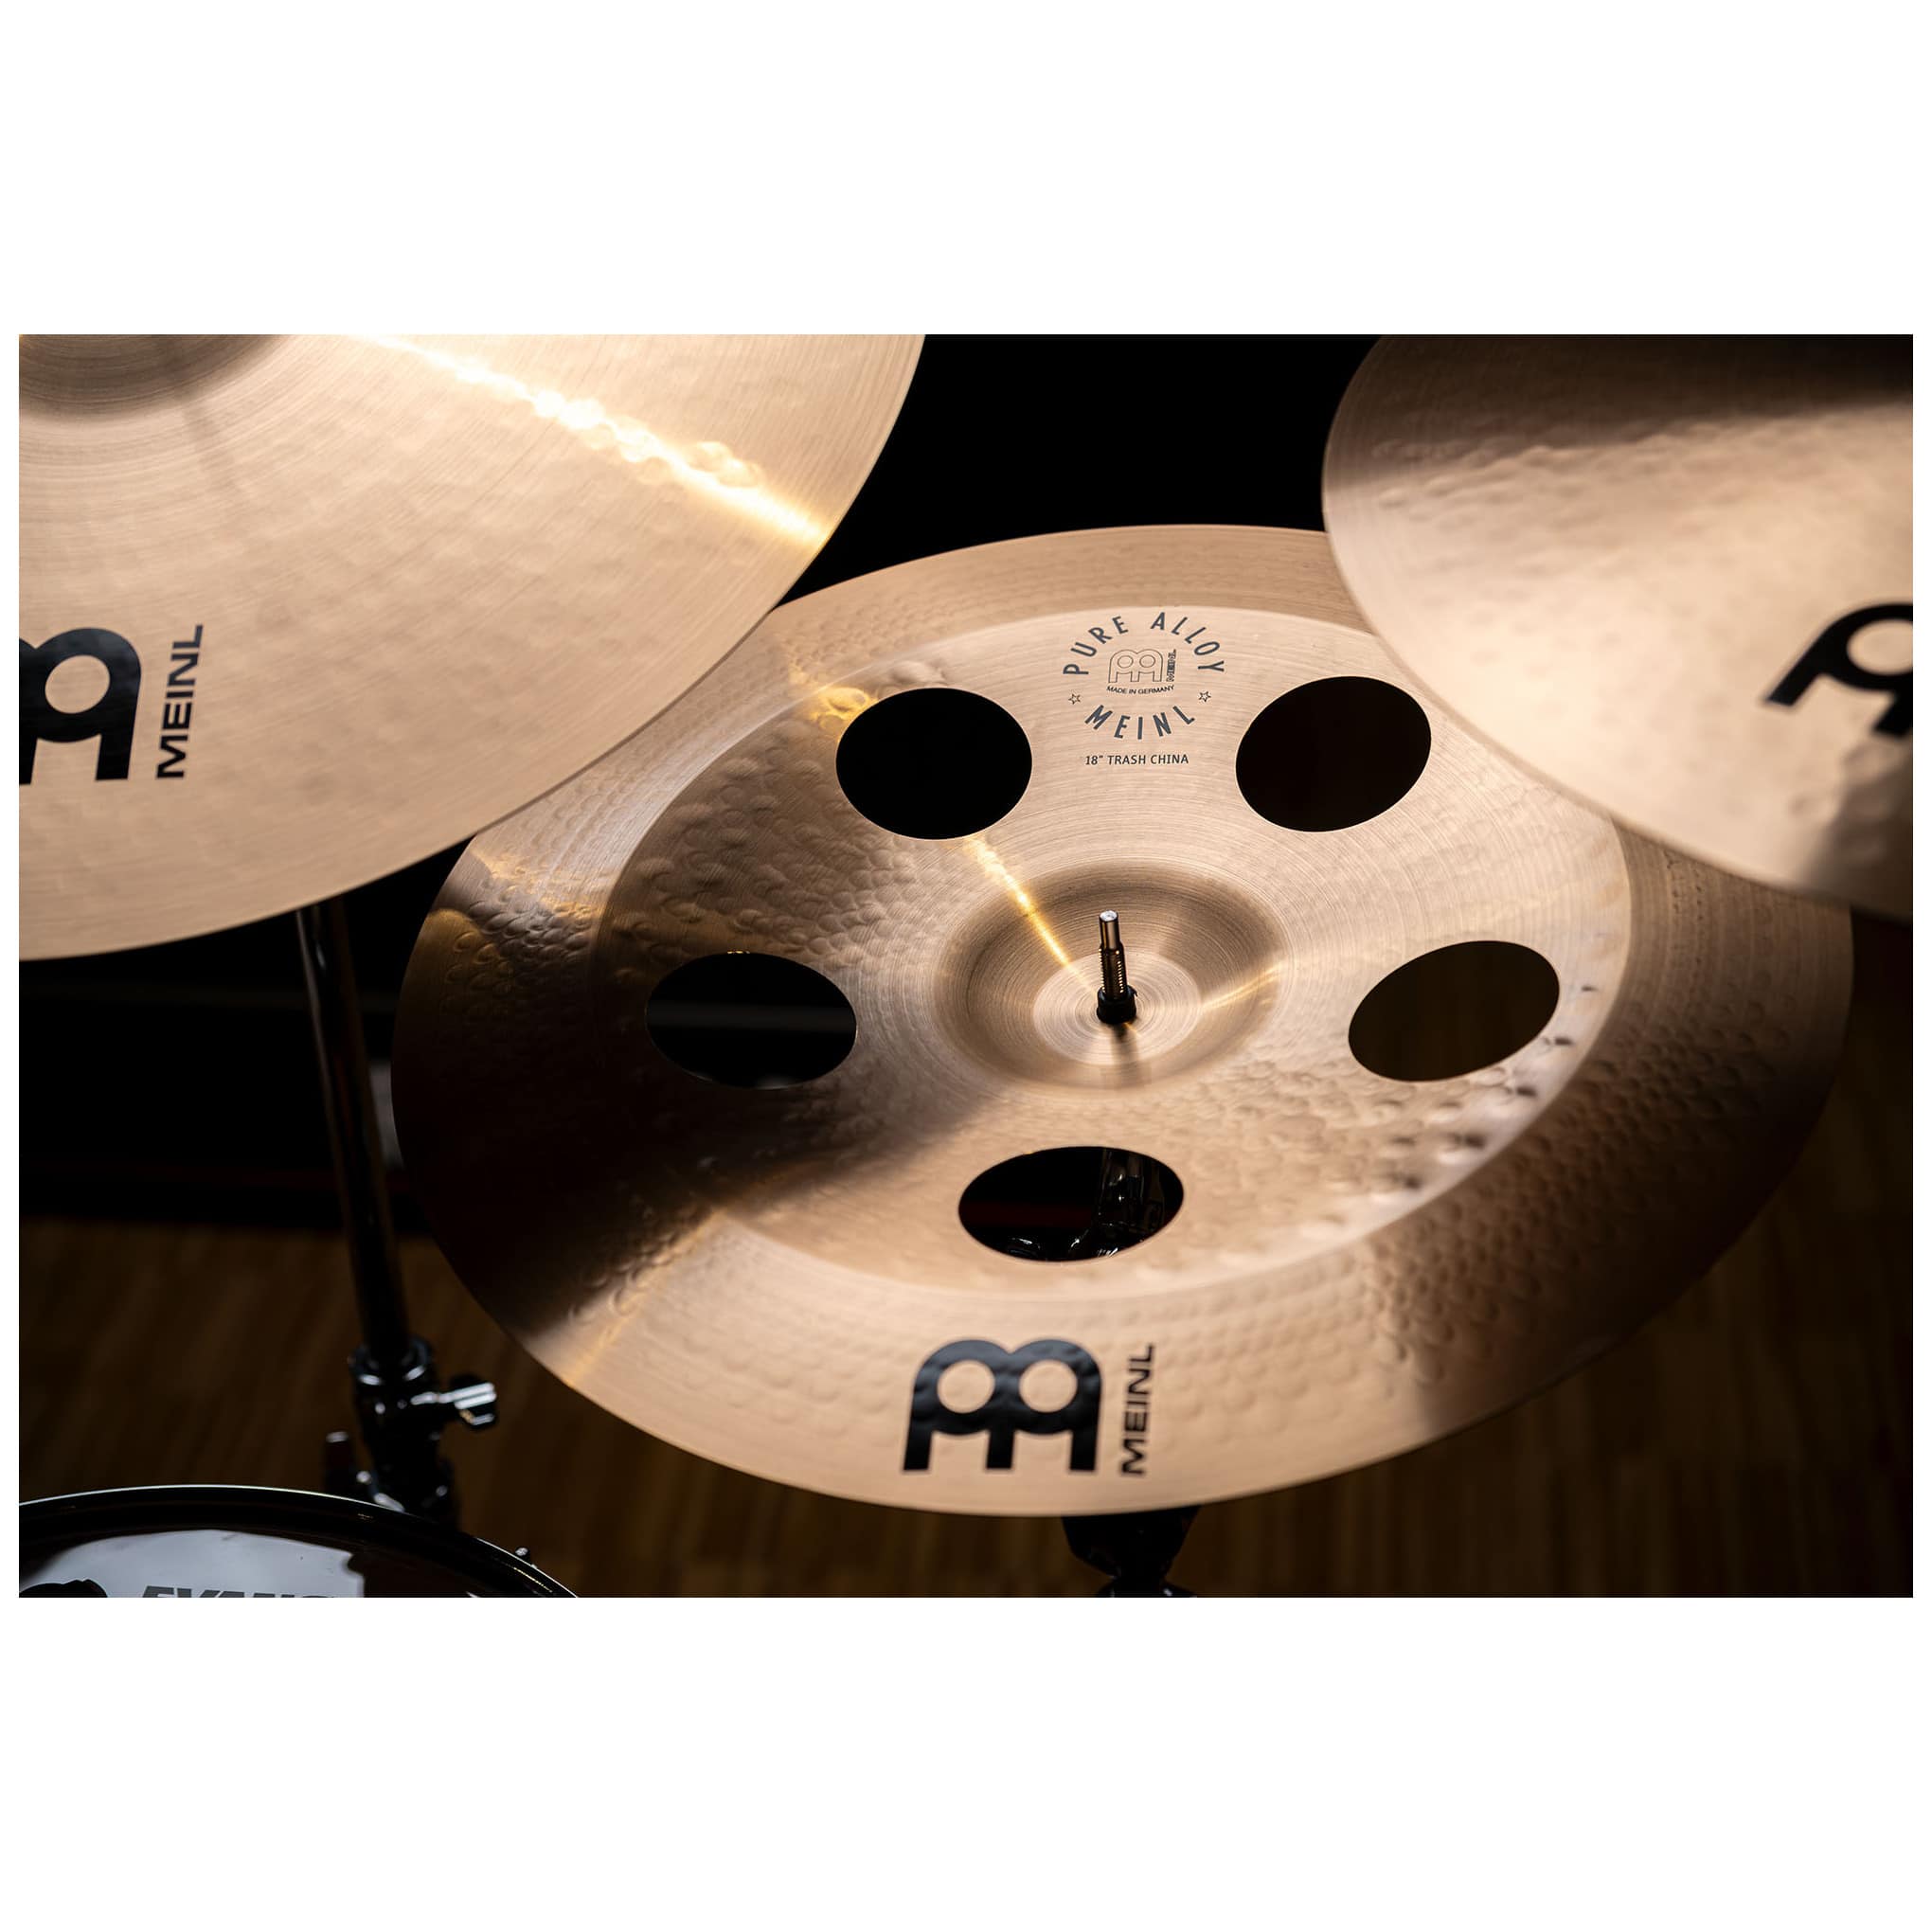 Meinl Cymbals PA18TRCH - 18" Pure Alloy Trash China 2